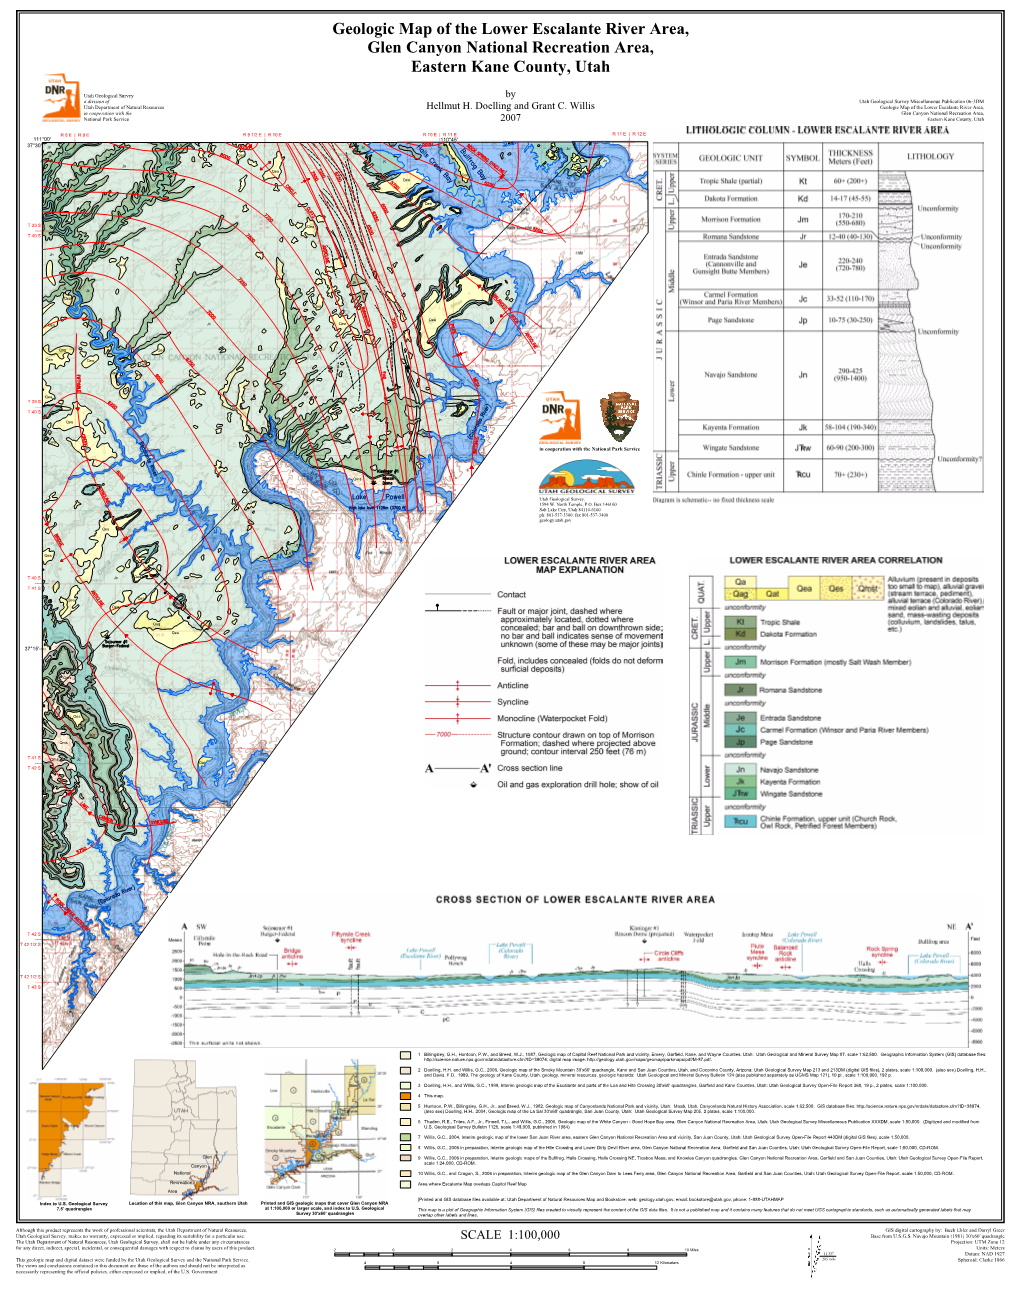 Geologic Map of the Lower Escalante River Area, Glen Canyon National Recreation Area, Eastern Kane County, Utah